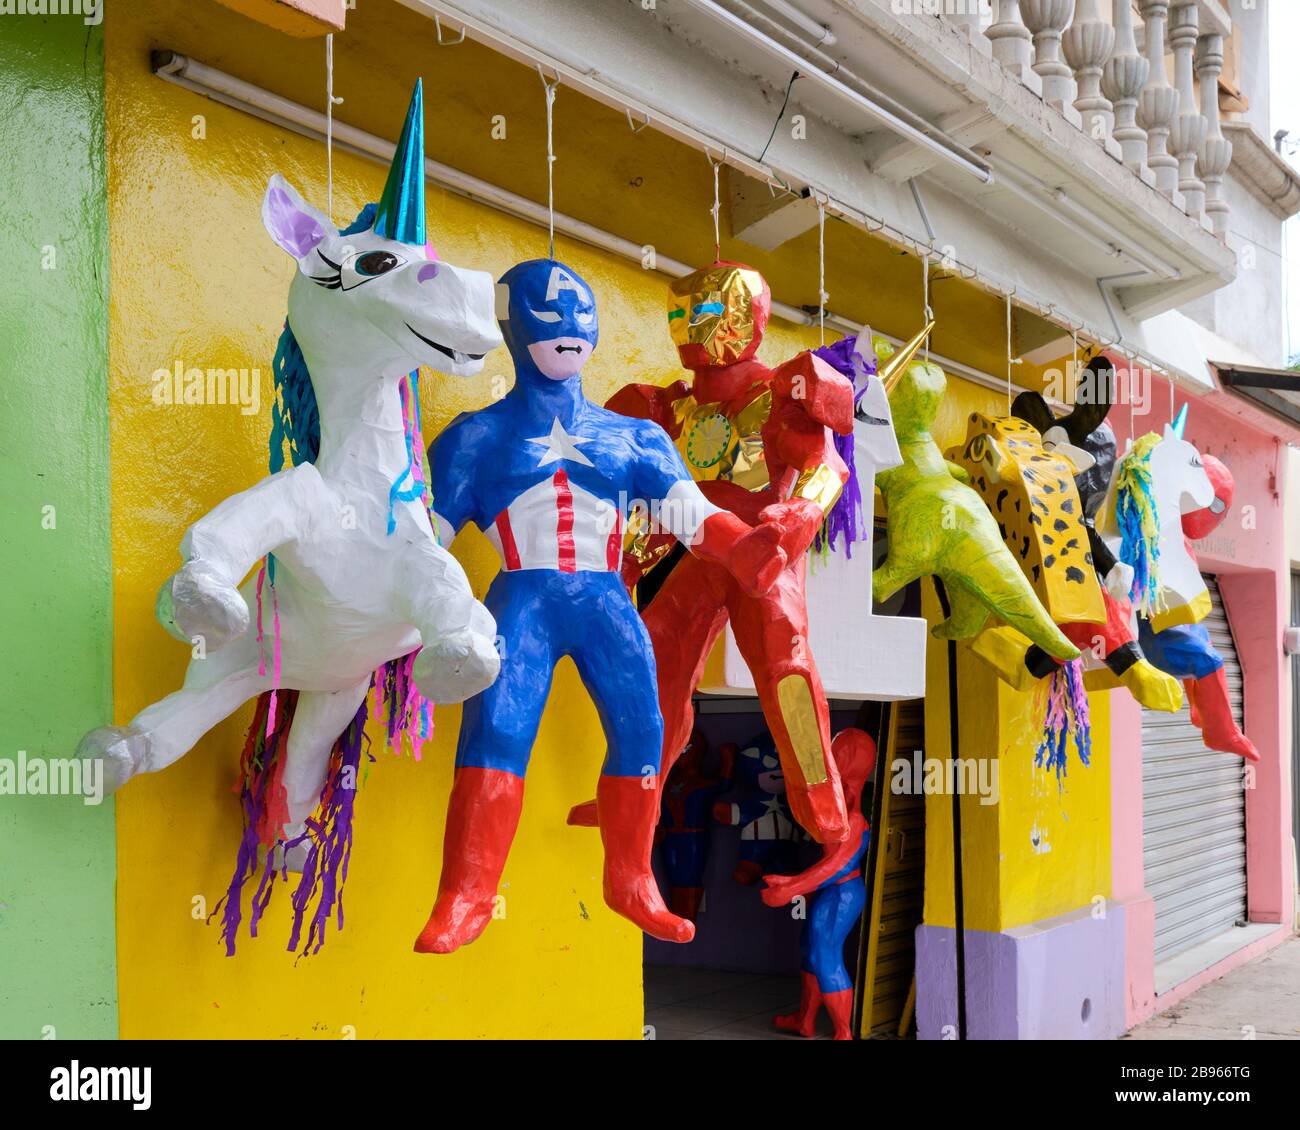 https://c8.alamy.com/comp/2B966TG/pinata-store-in-oaxaca-with-hanging-display-featuring-super-heros-and-animals-2B966TG.jpg